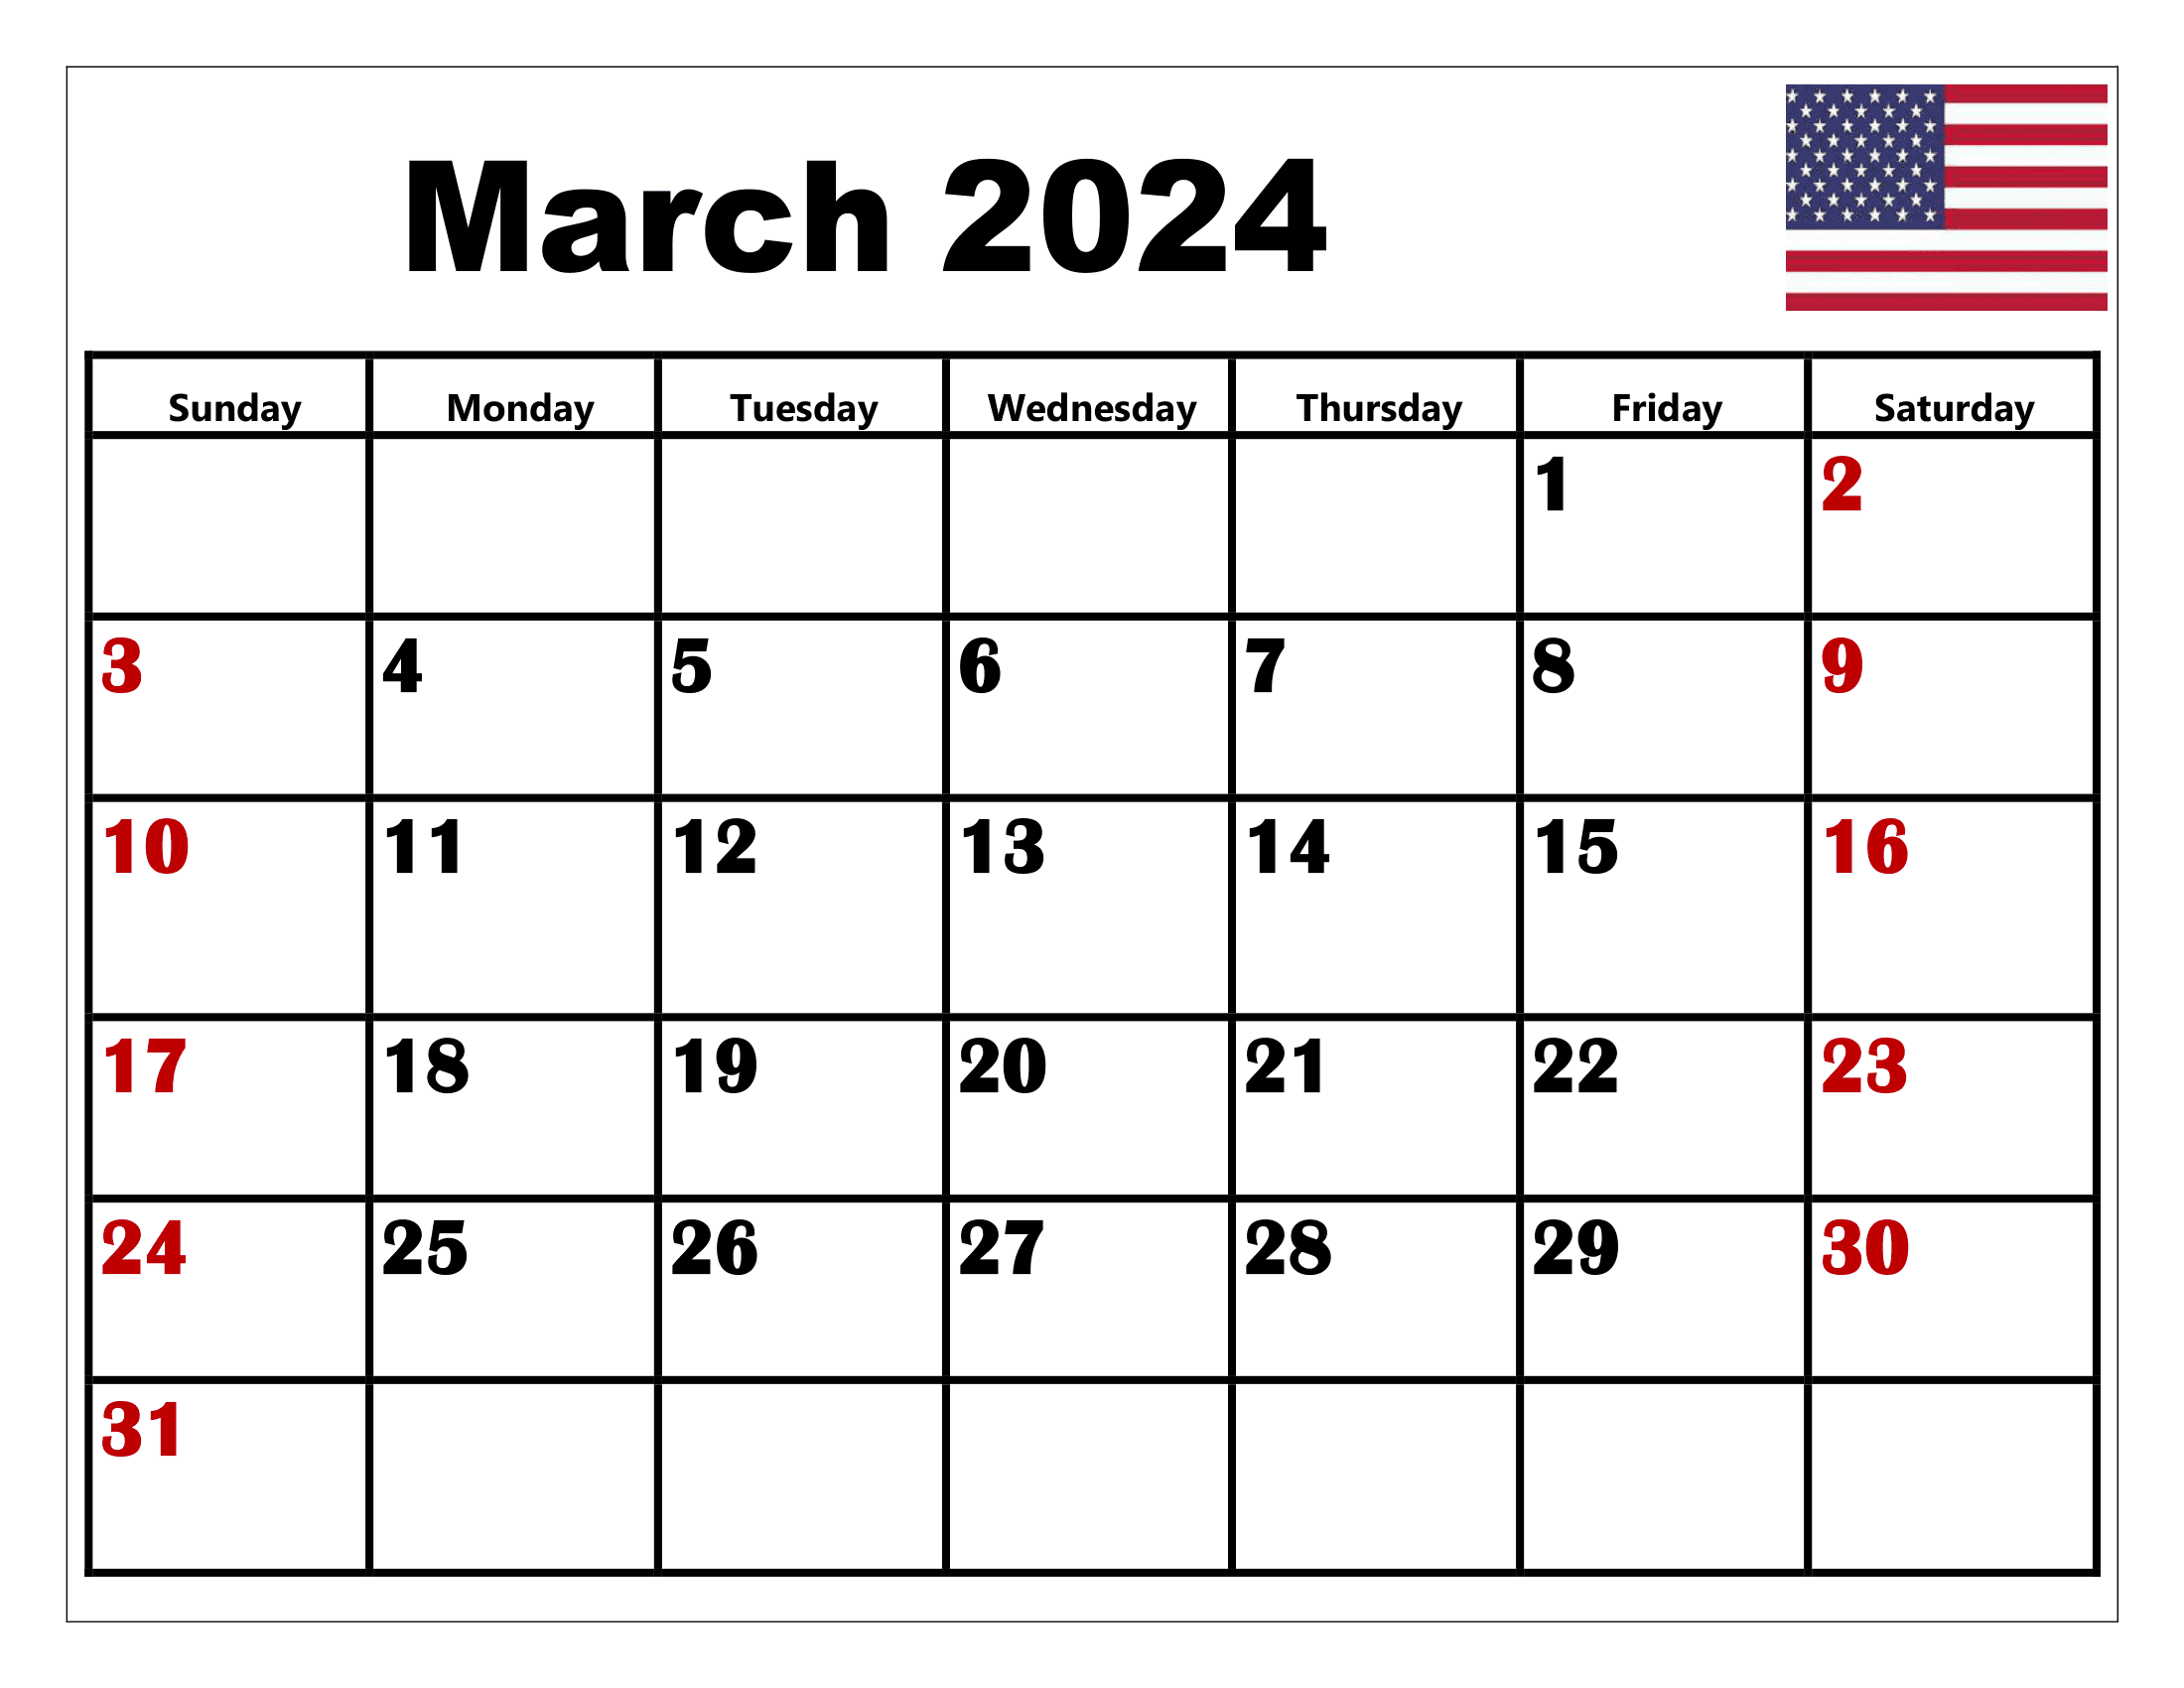 Free March 2024 Calendar With Holidays Pdf Linda Paulita - Free Printable 2024 Calendar By Month With Holidays